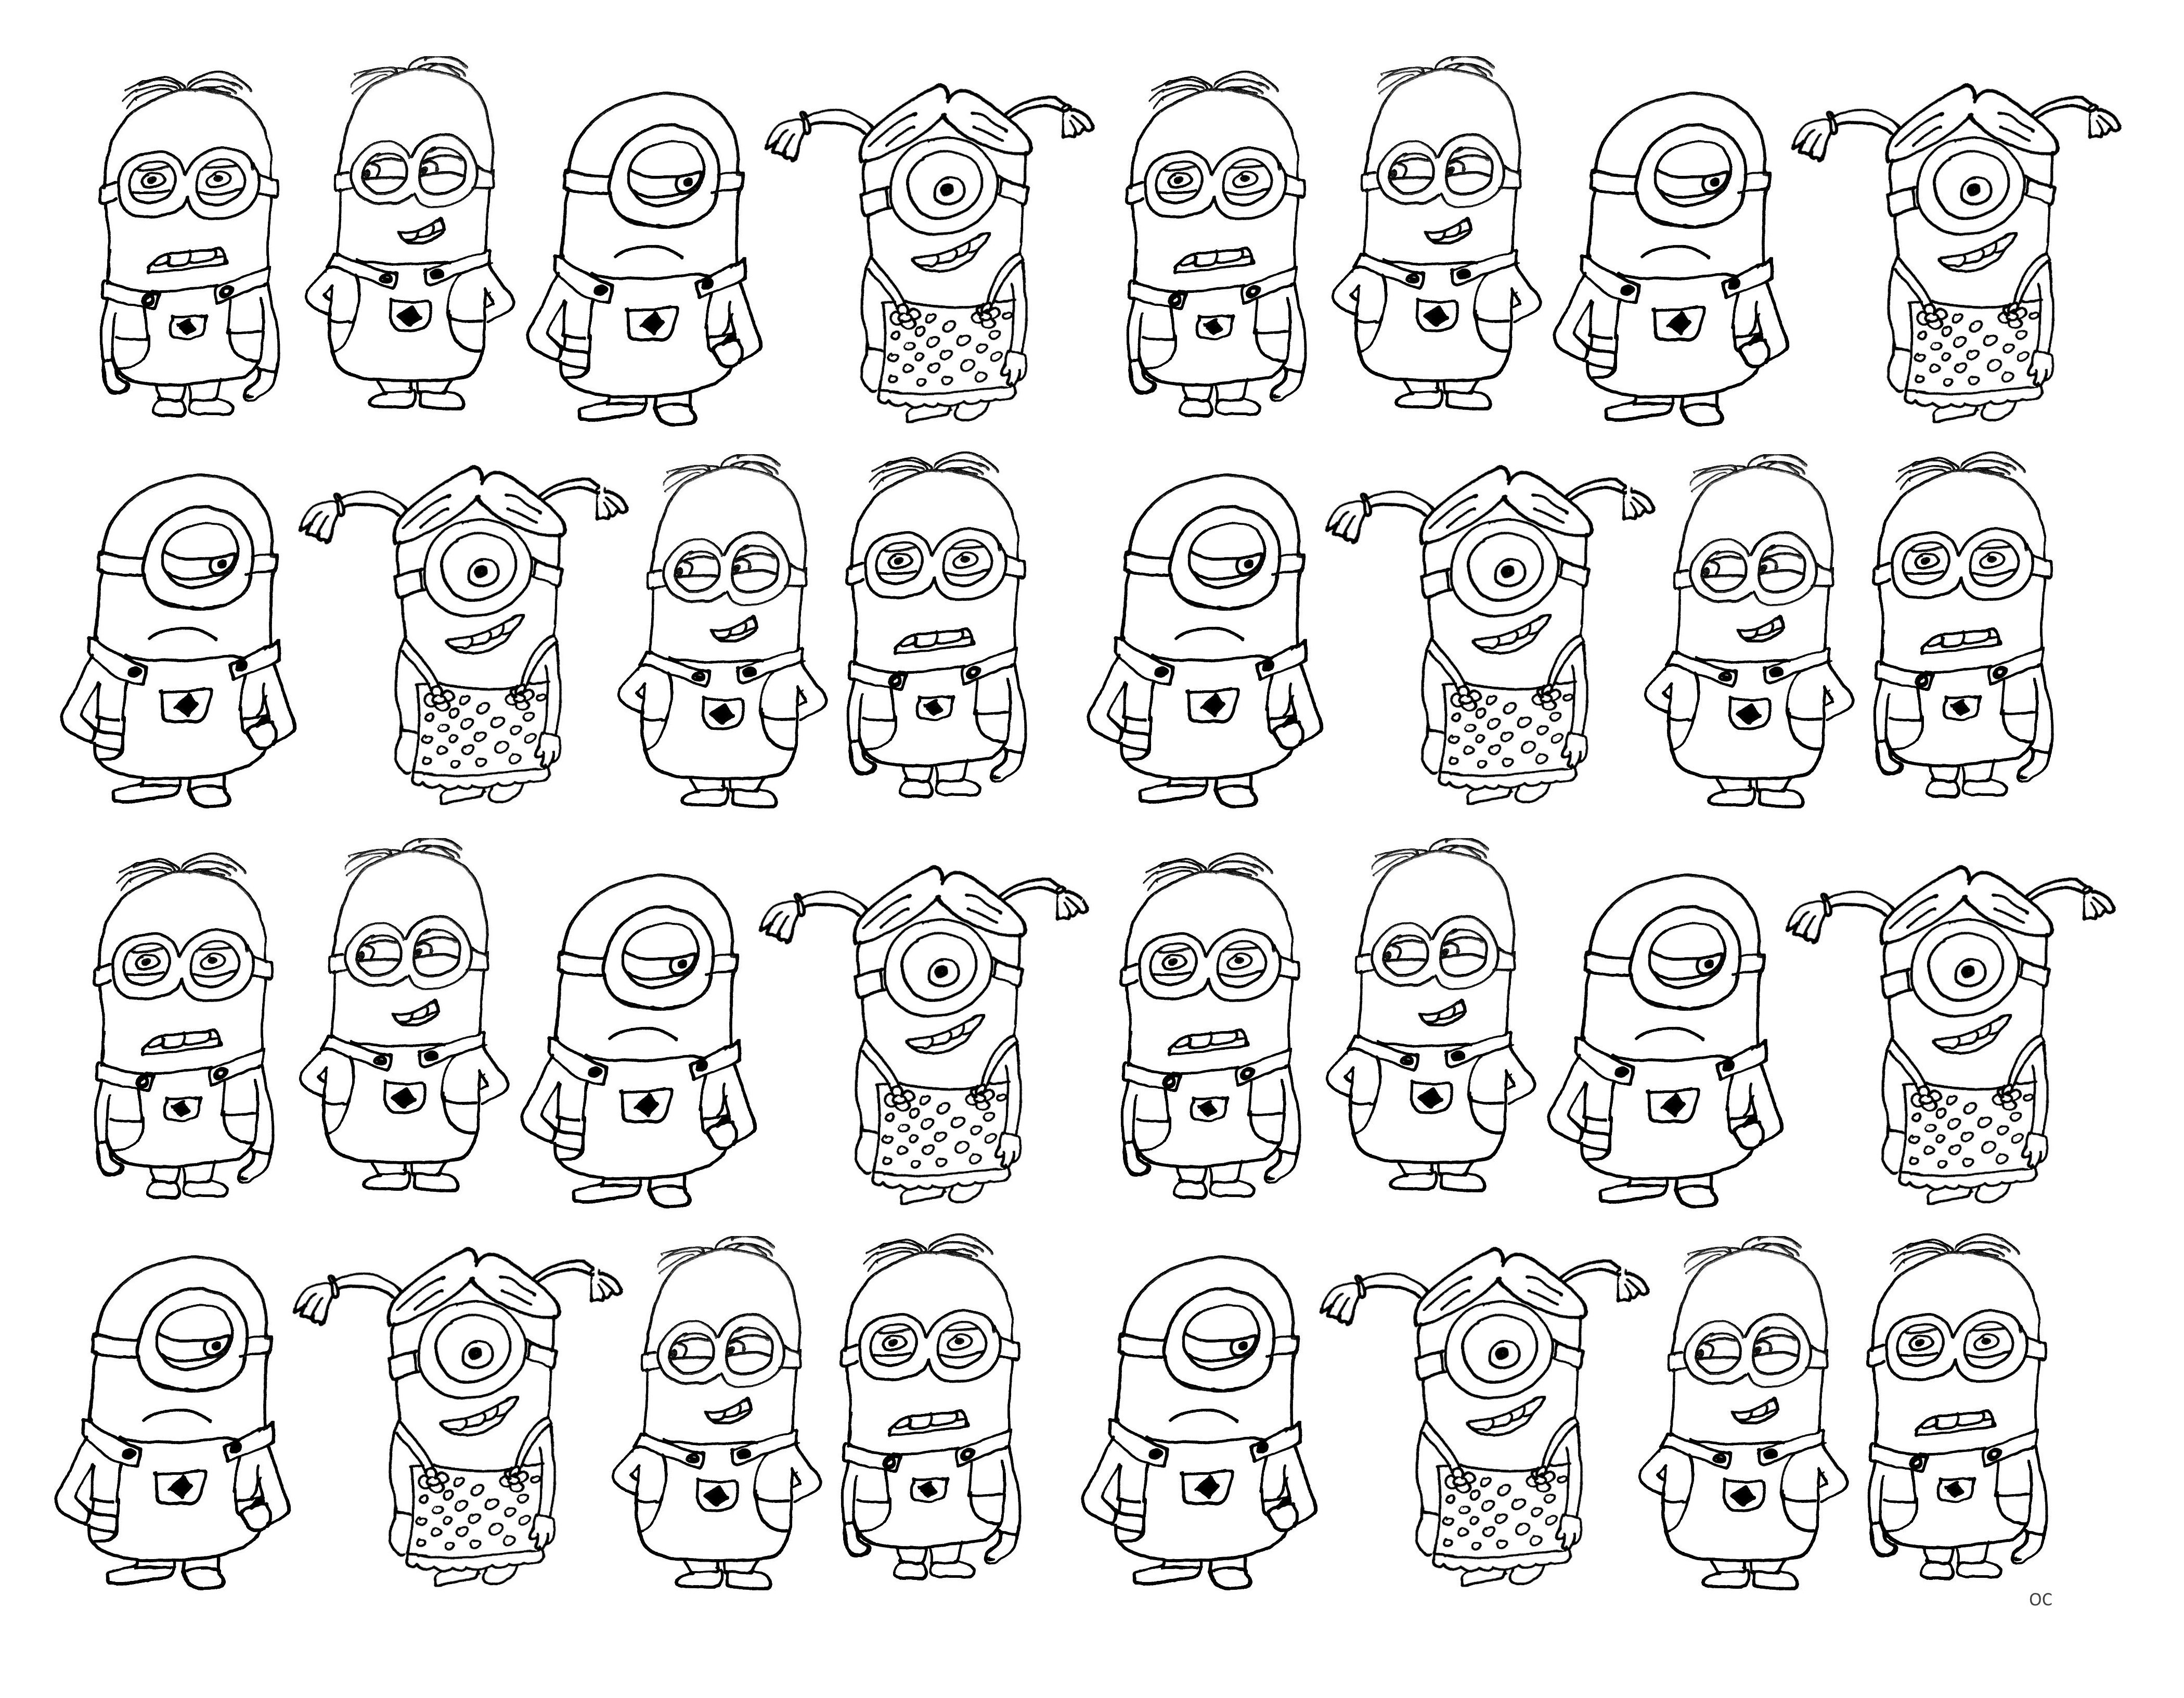 Very numerous minions - Image with : Minions